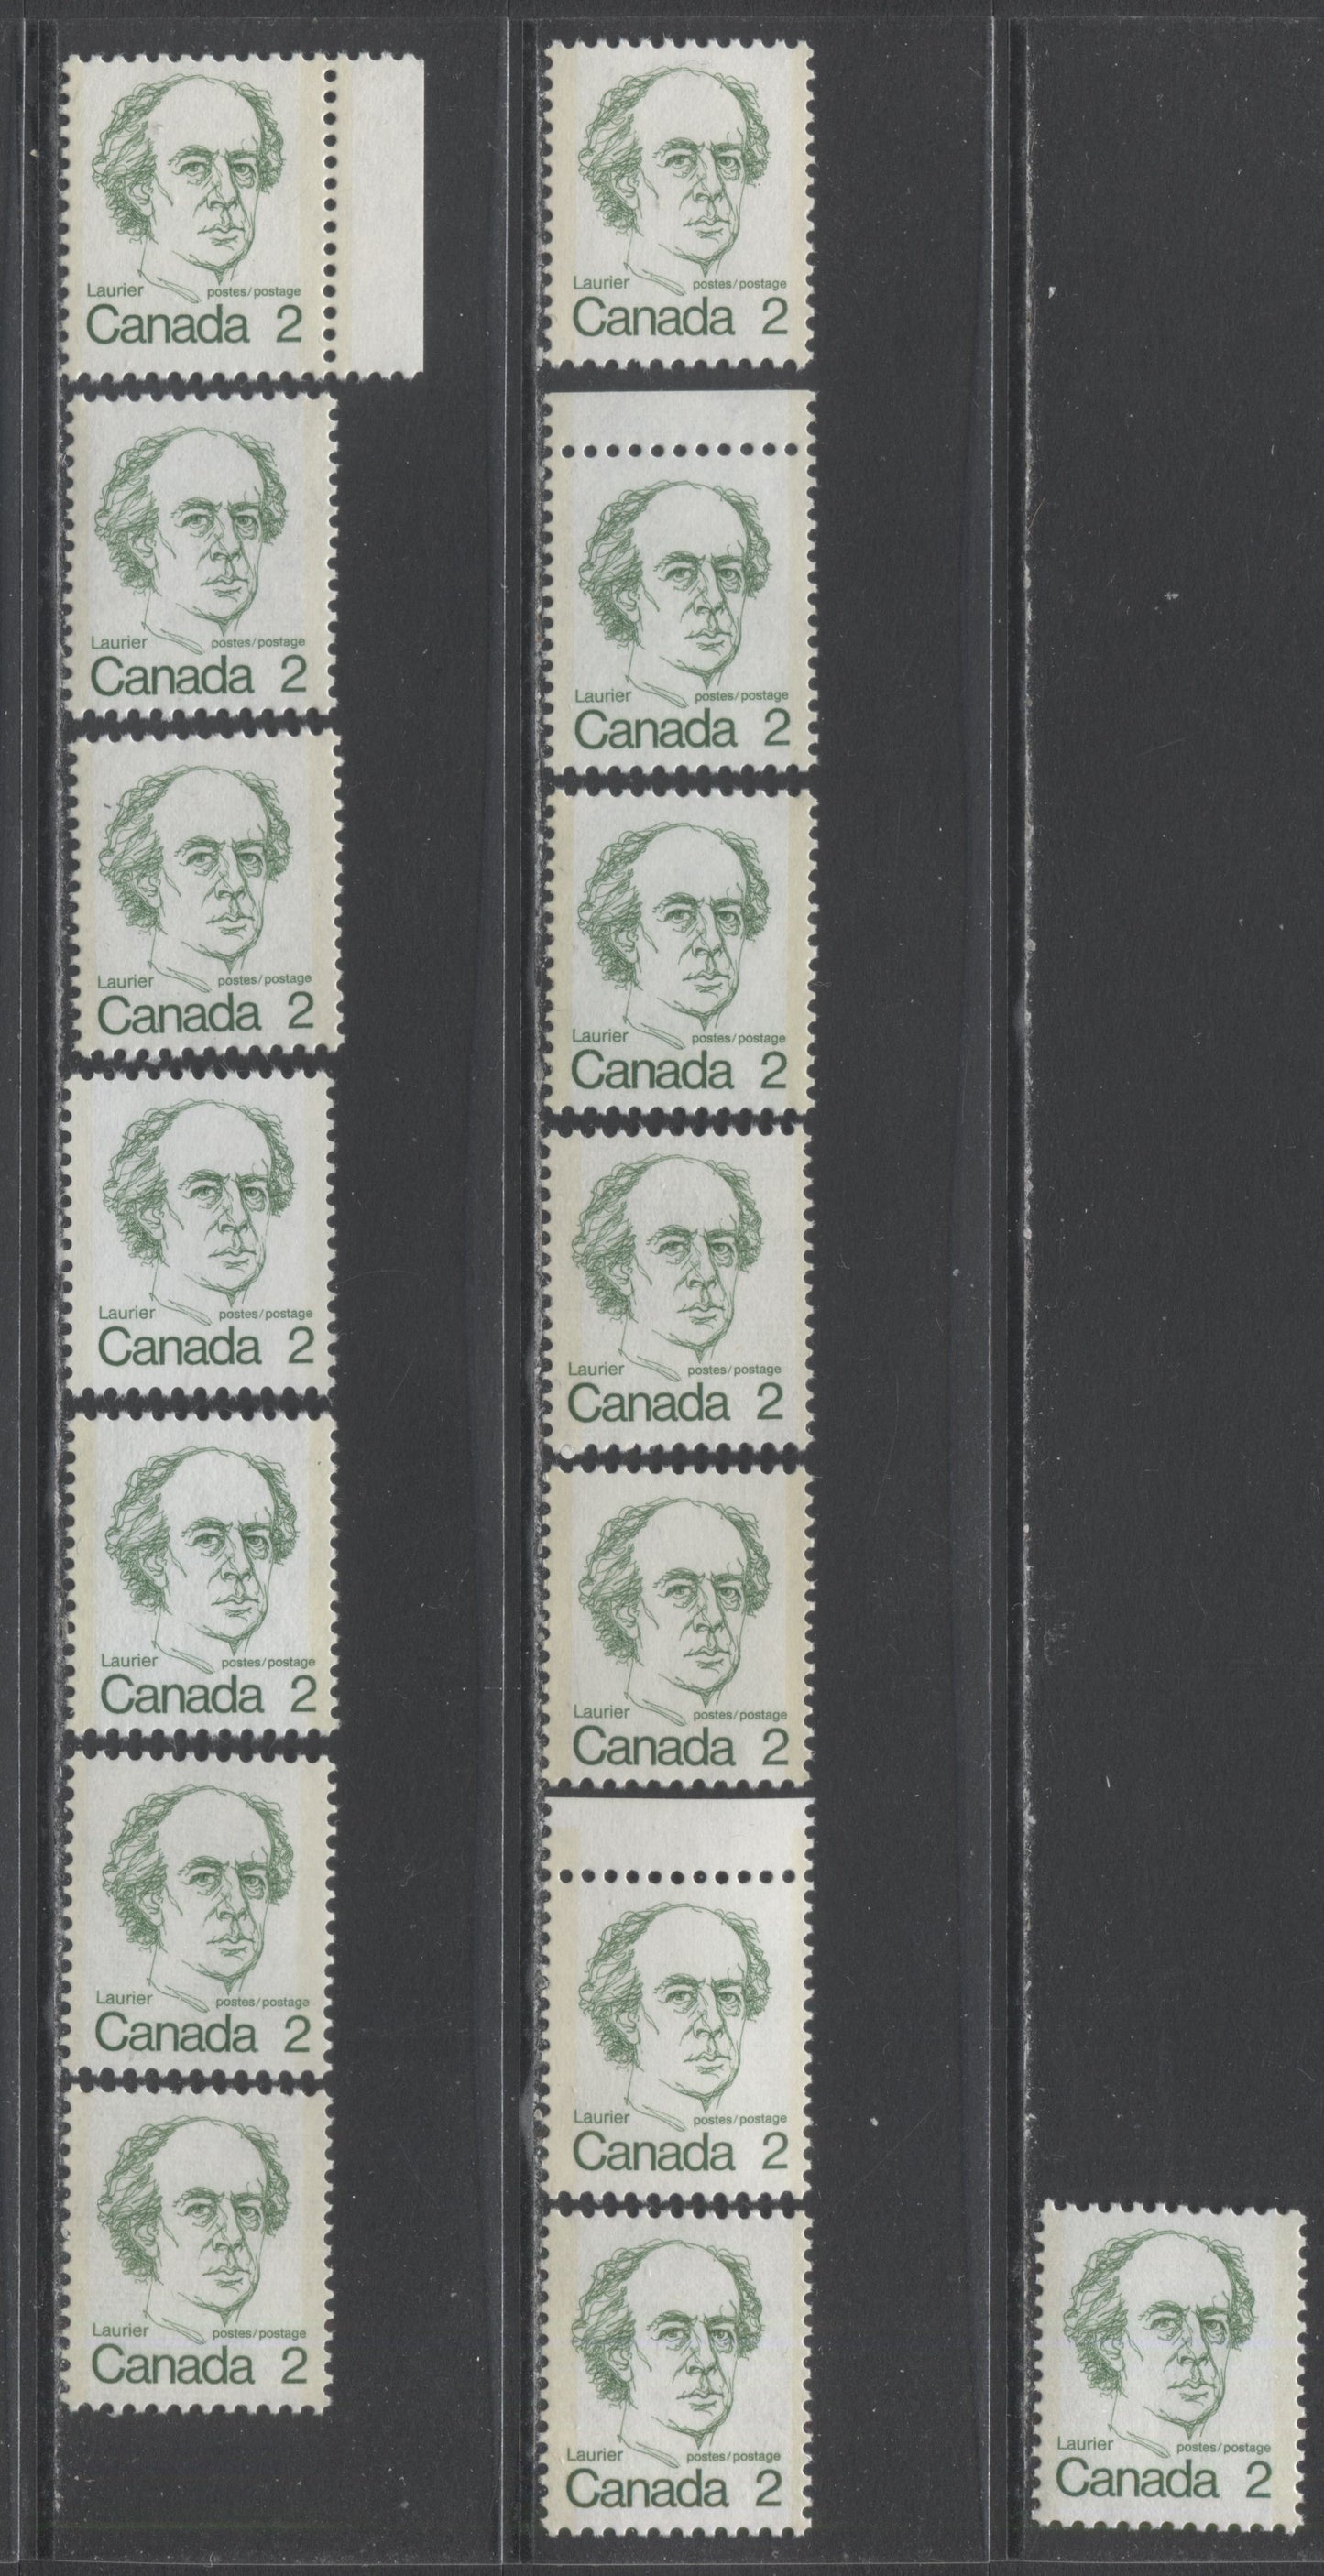 Lot 297 Canada #587,ii,iii,v,vi,x 2c Green Sir Wilfred Laurier, 1973 - 1976 Caricature Issue, 15 VFNH Singles On Different Paper/Tag Types Including Many Unlisted